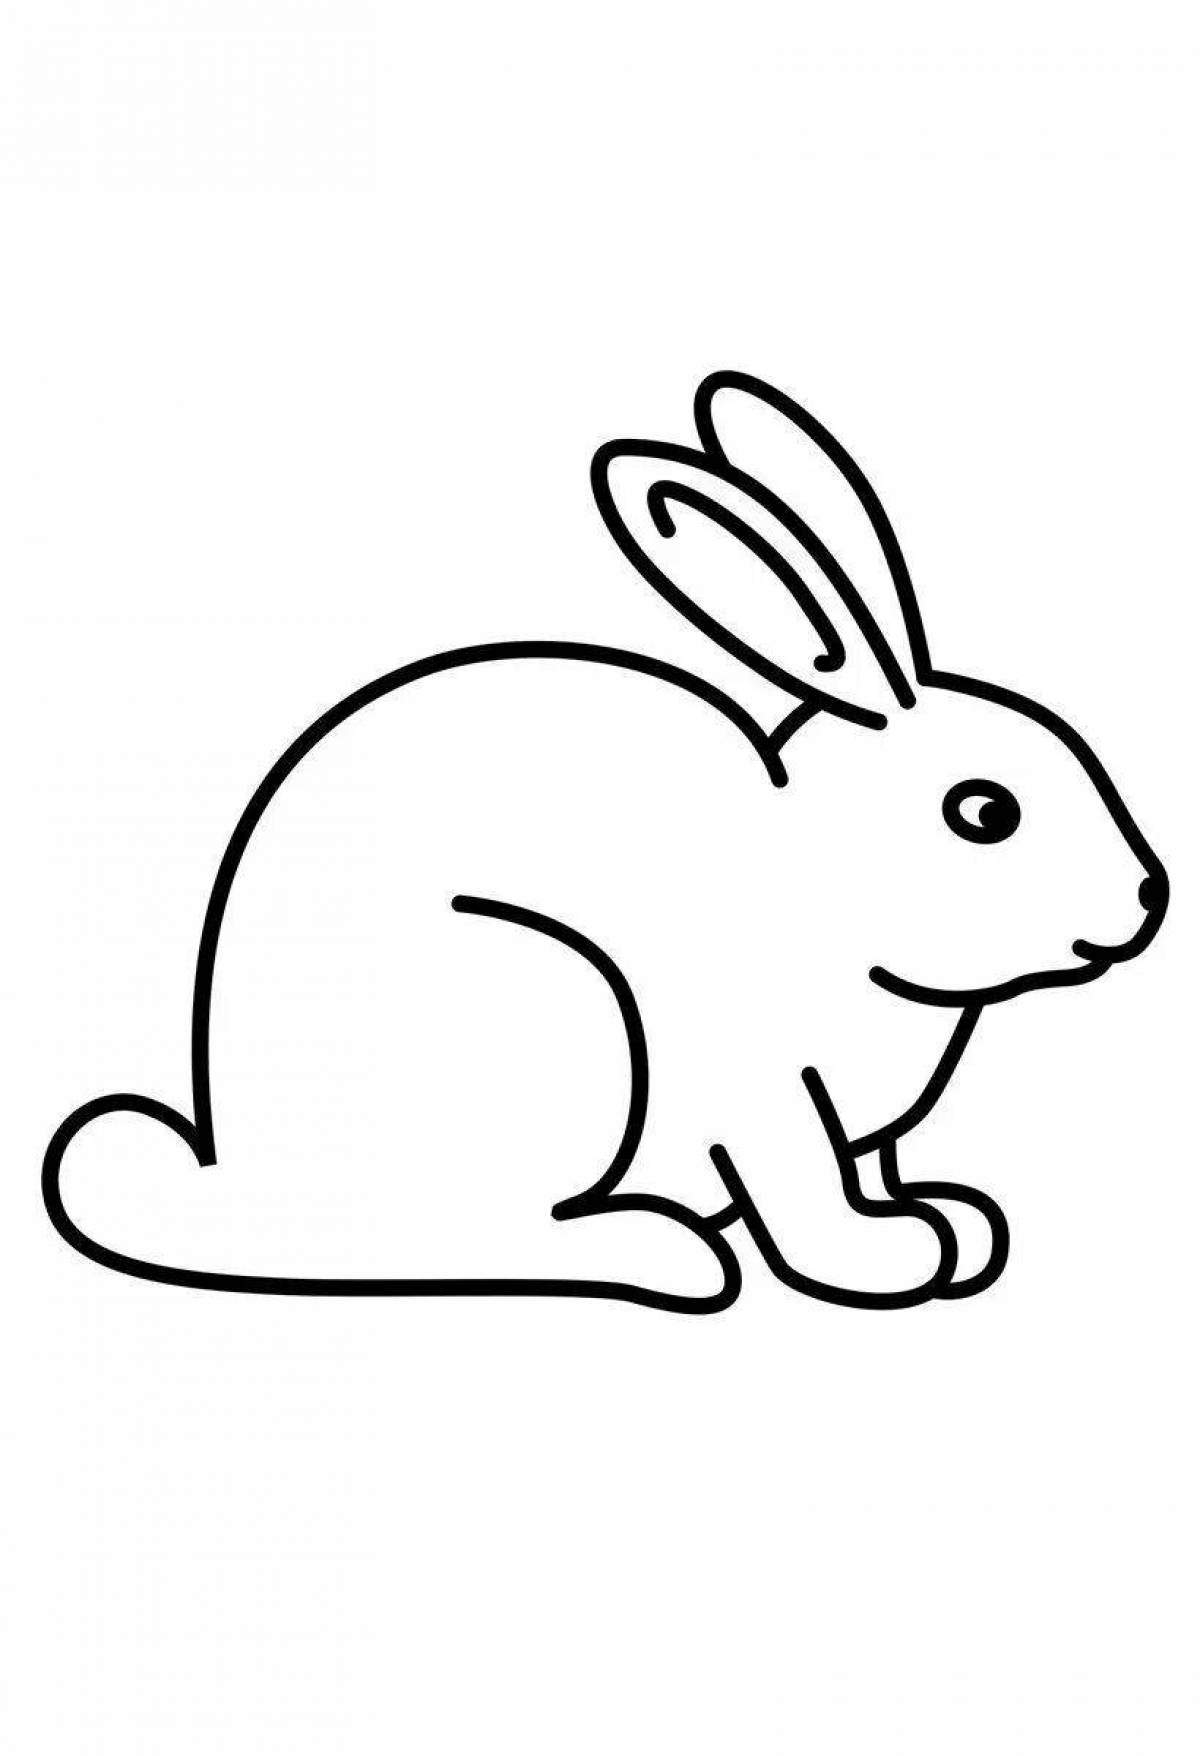 Colored fun coloring picture of a hare for kids